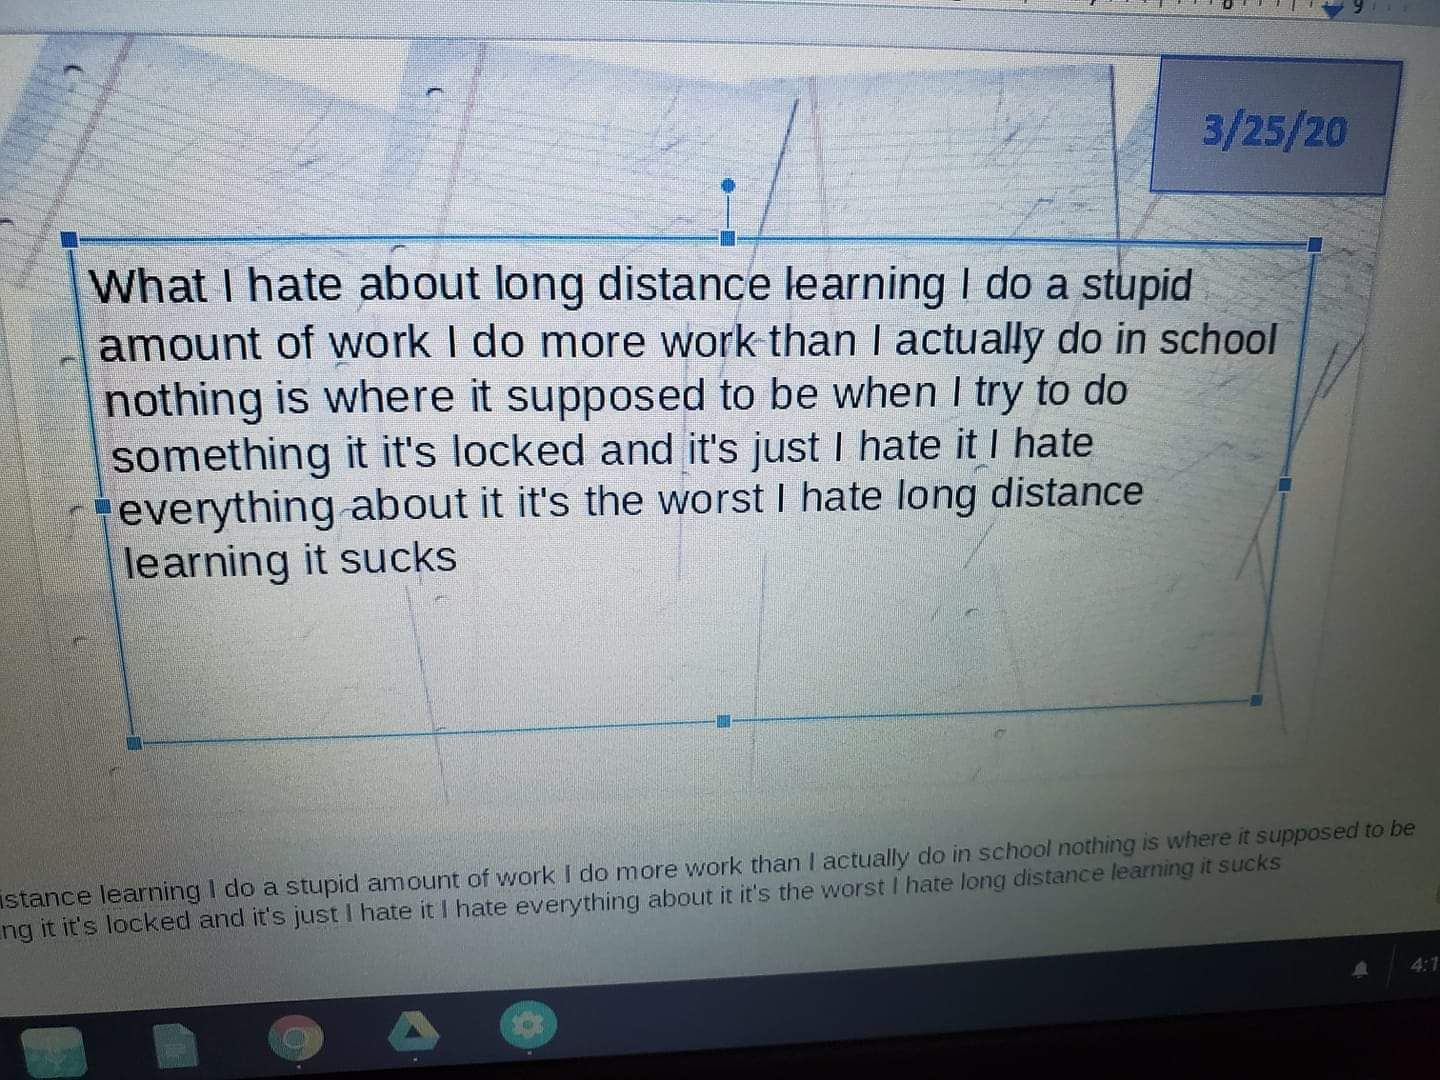 Long Distance Learning according to an 8 year old